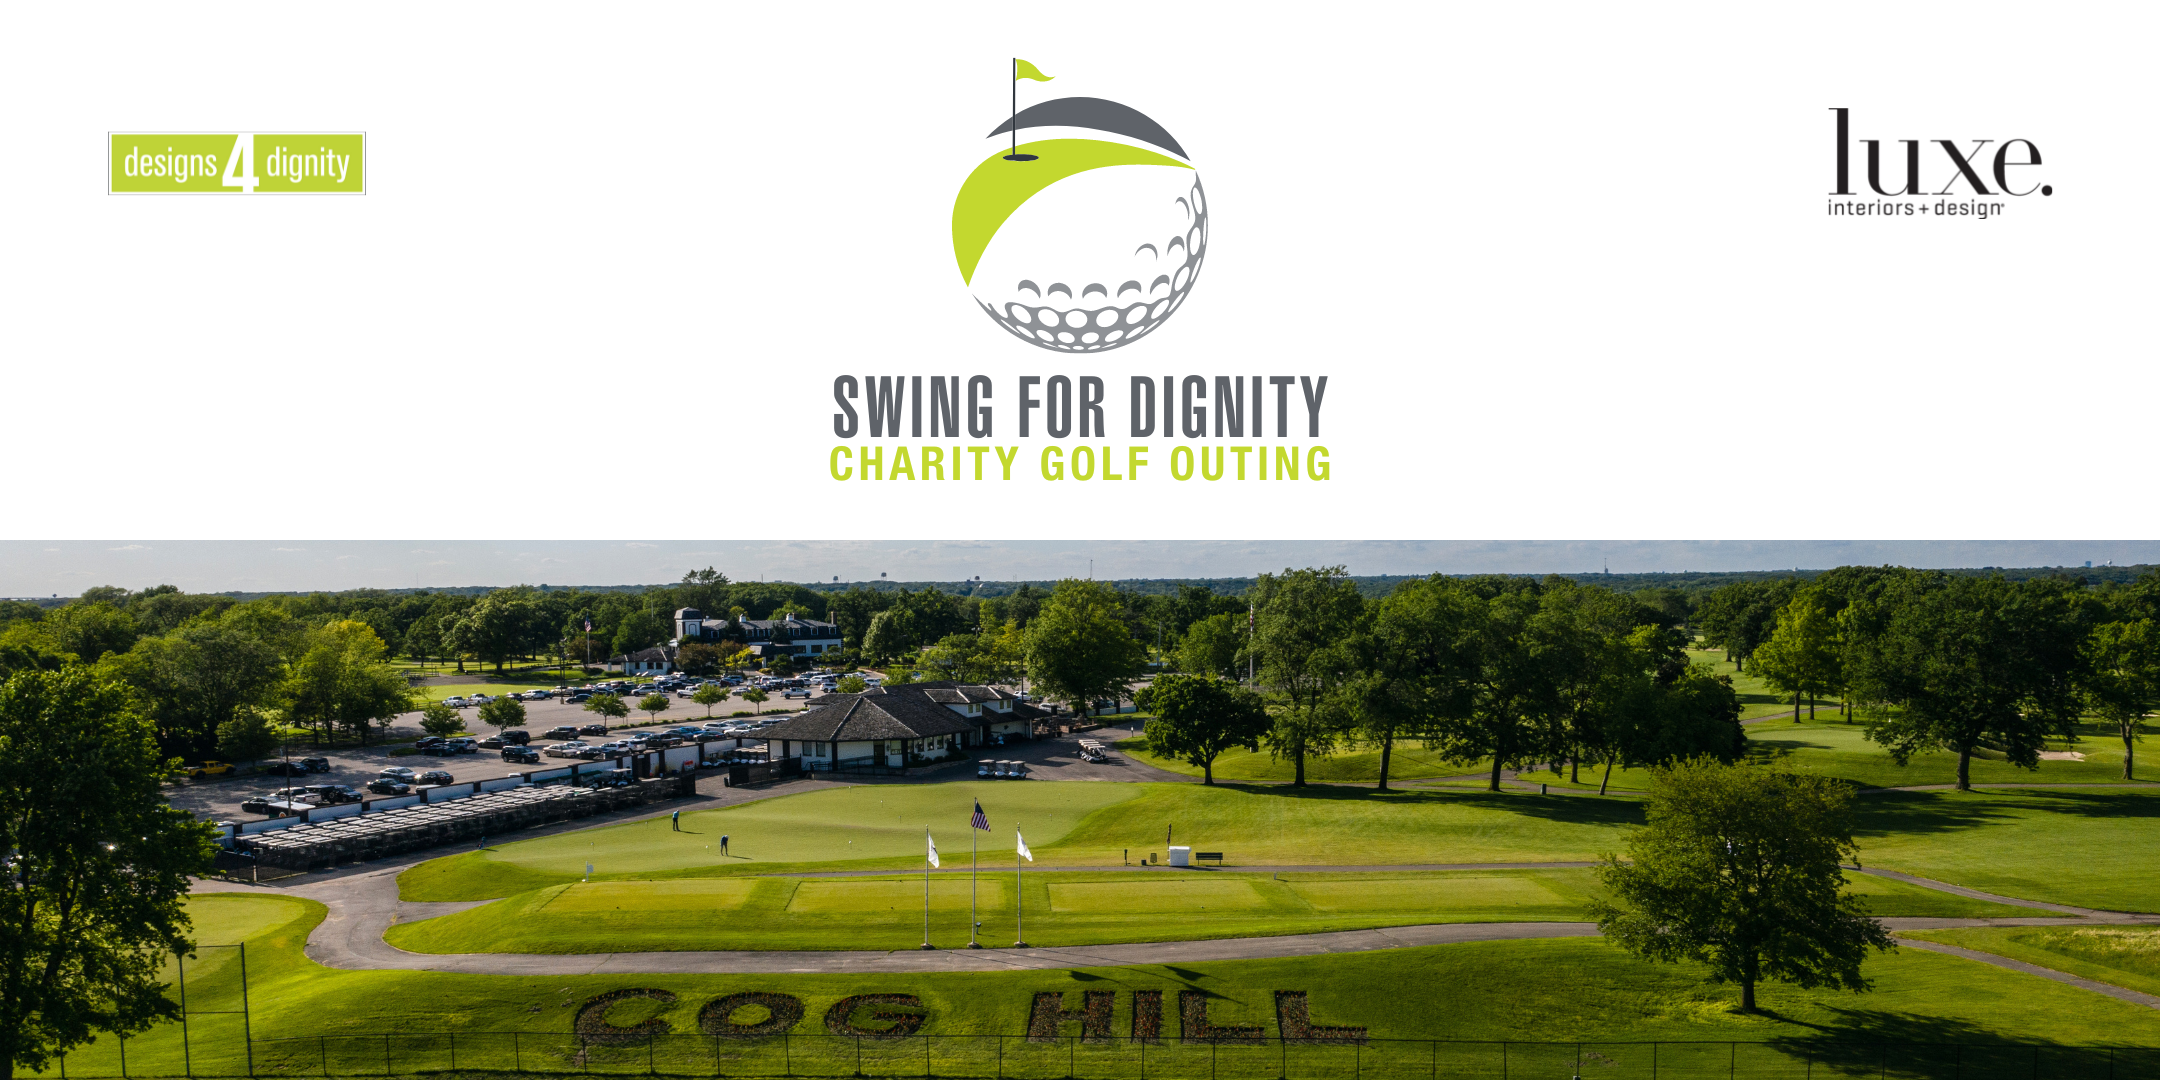 Swing for Dignity - Charity Golf Outing